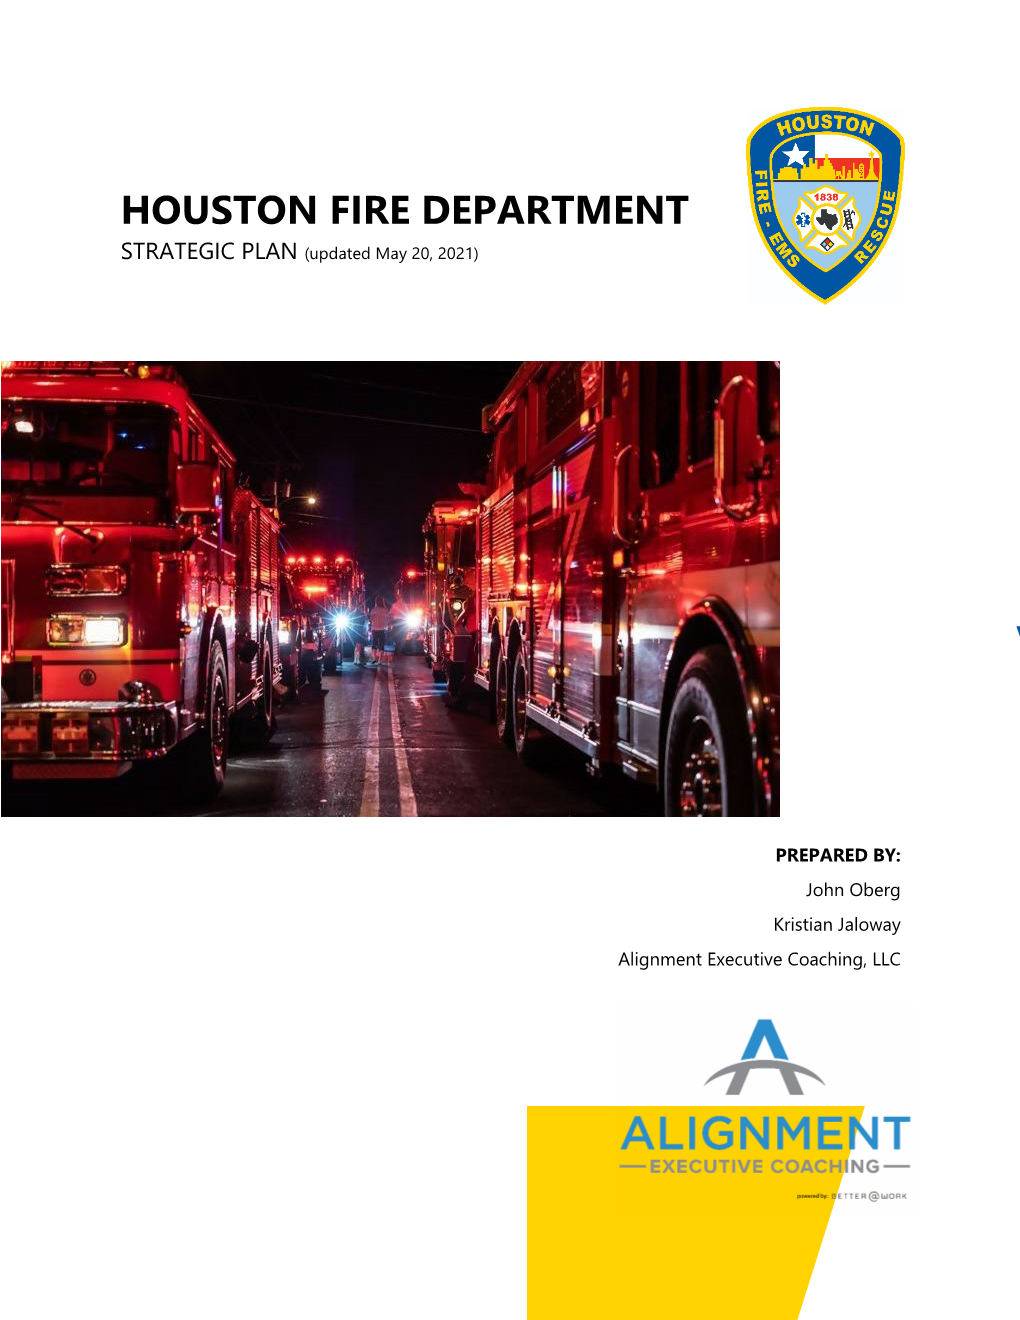 HOUSTON FIRE DEPARTMENT STRATEGIC PLAN (Updated May 20, 2021)